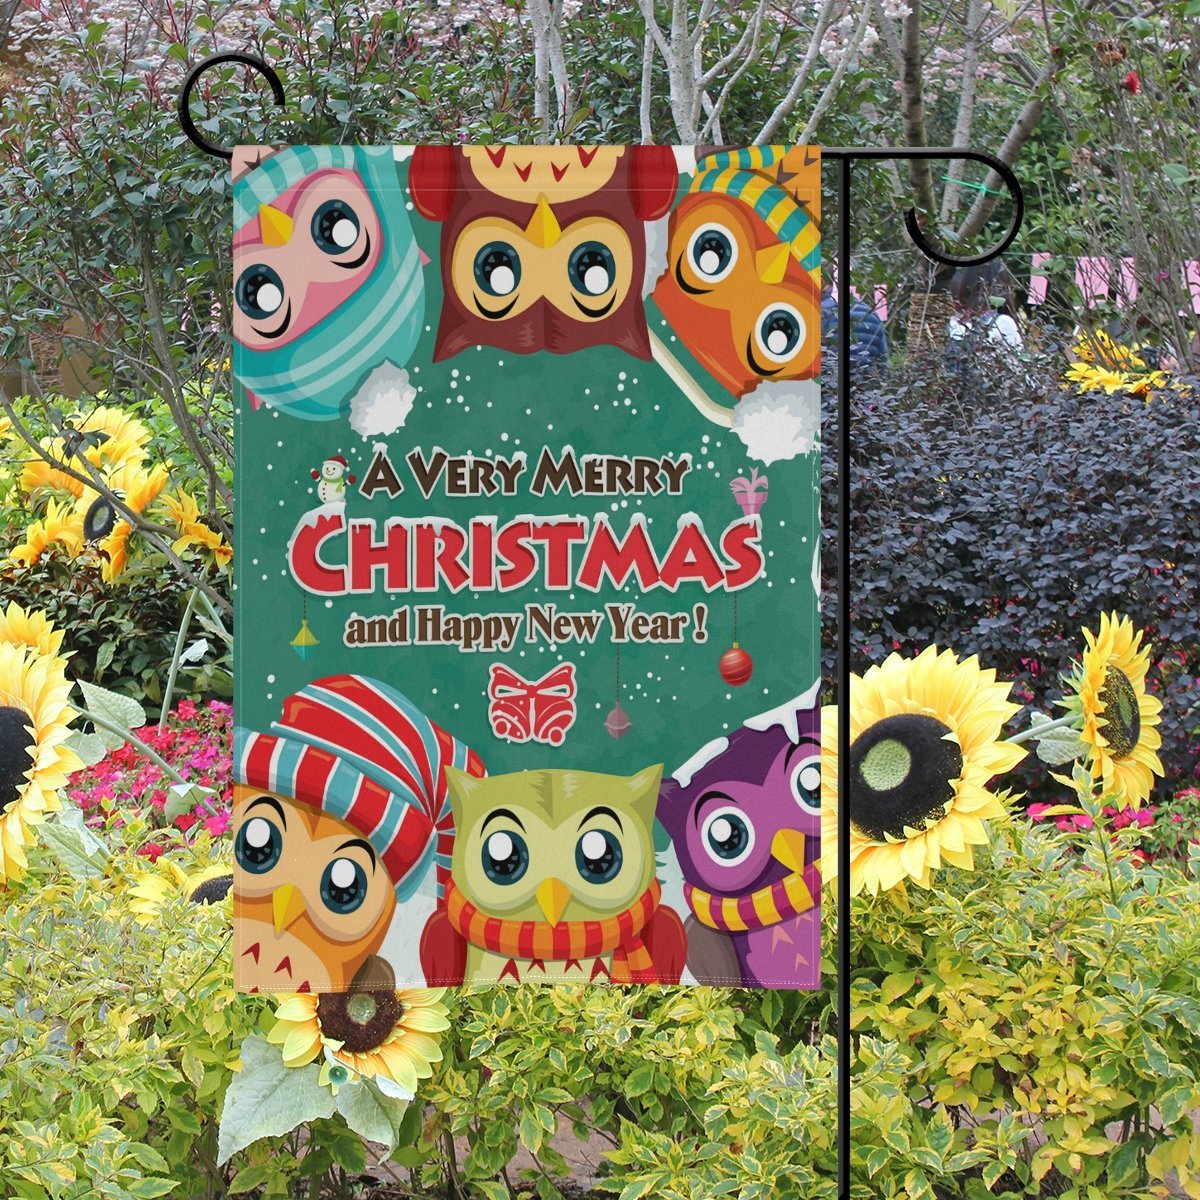 POPCreation Vintage Christmas Poster Design With Owls Polyester Garden Flag Outdoor Flag Home Party Garden Decor 28x40 inches - image 2 of 2